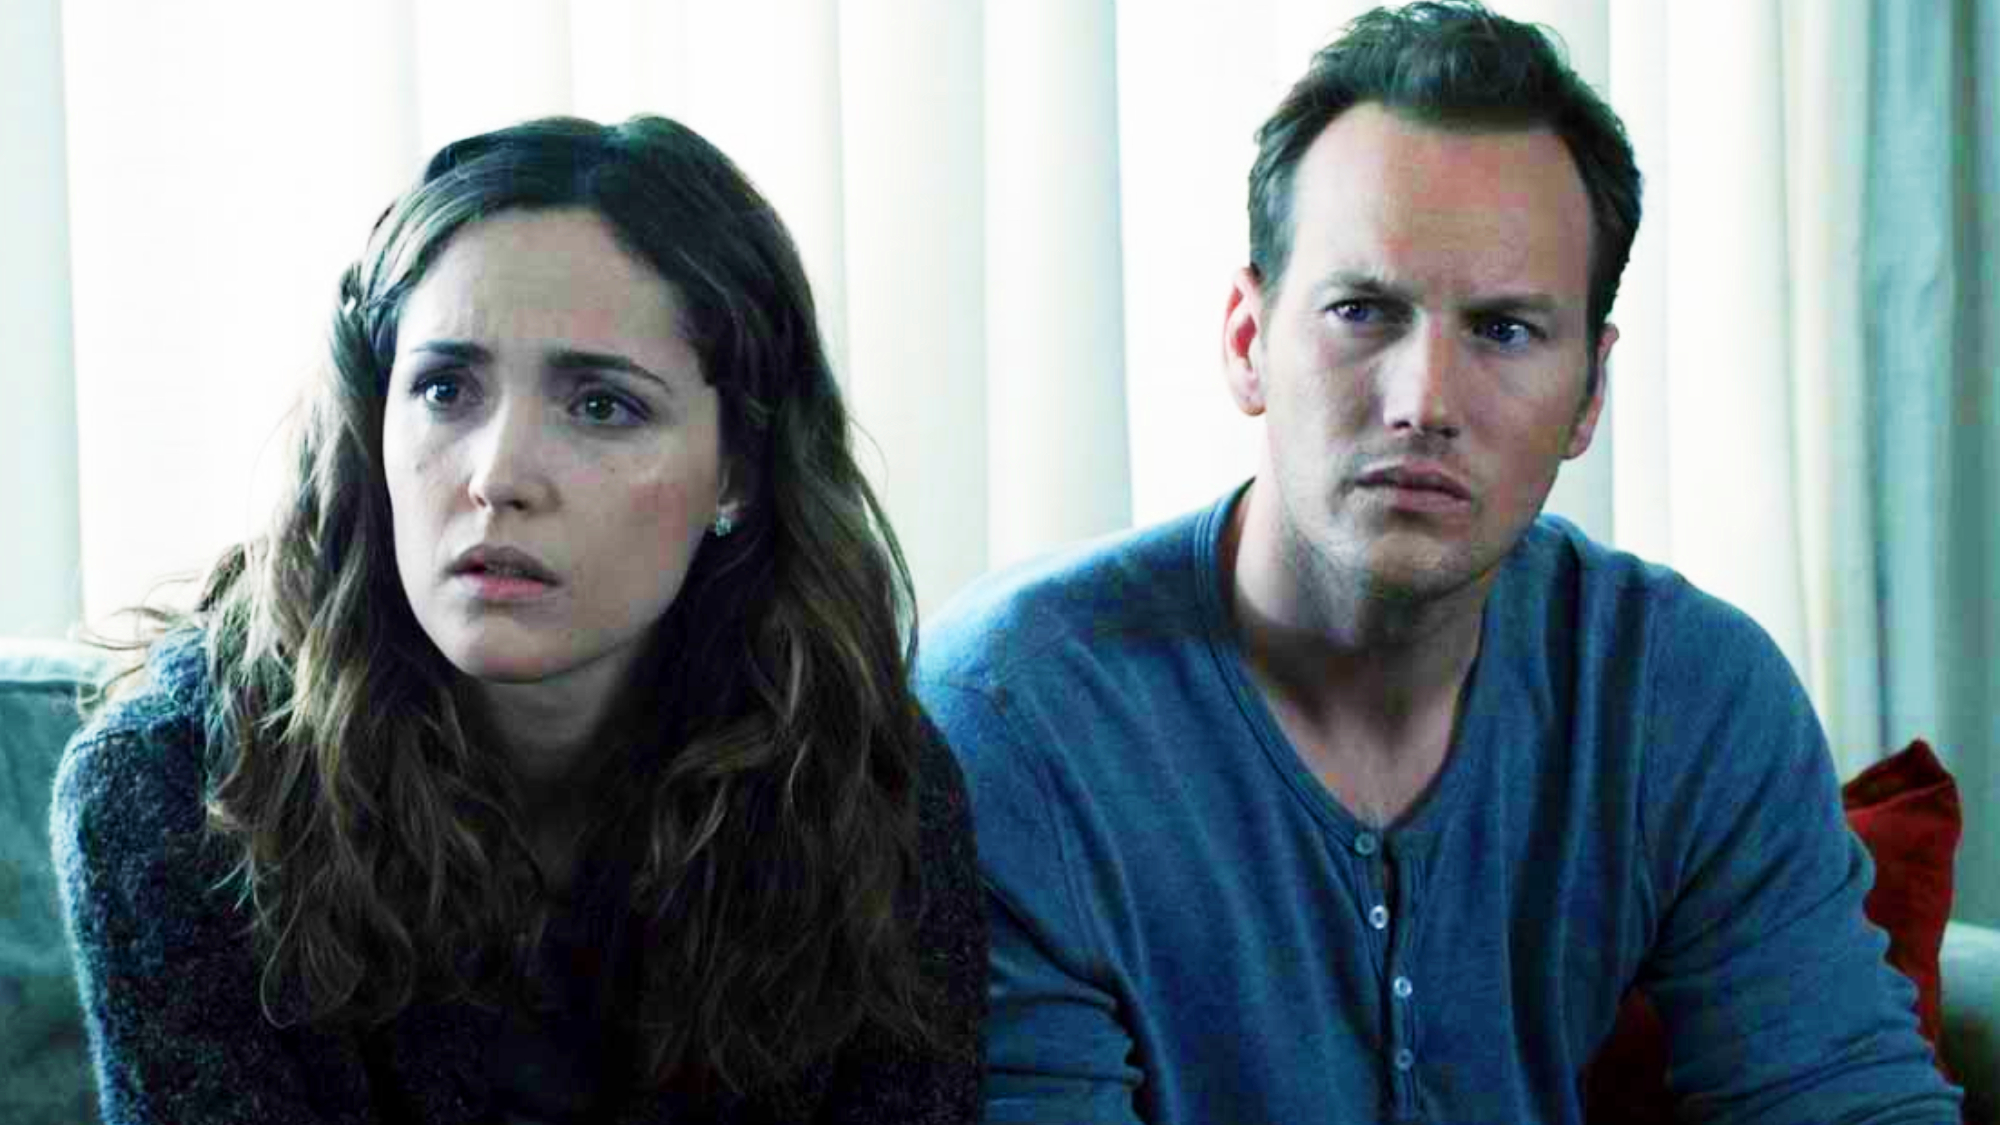 (L to R) Rose Byrne and Patrick Wilson in Insidious movie 2010